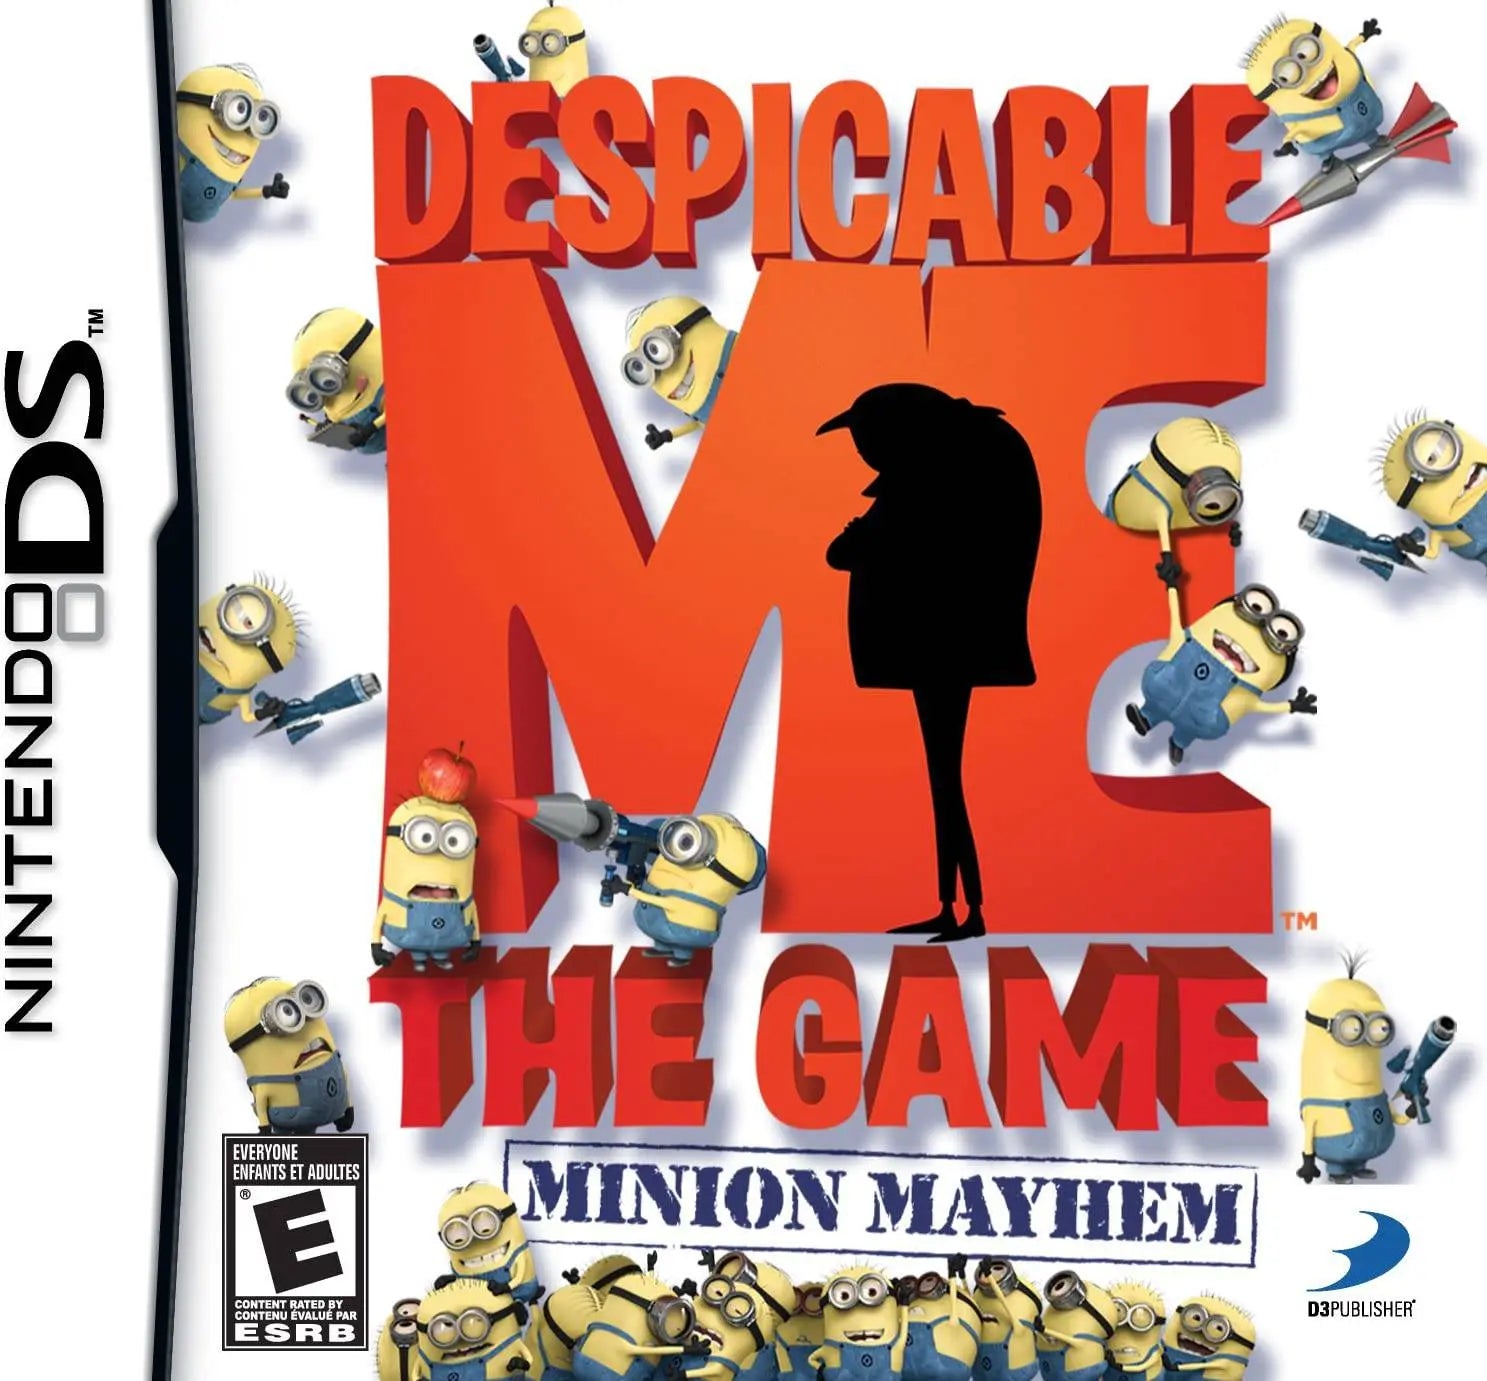 Despicable Me - Nintendo DS - Used King Gaming